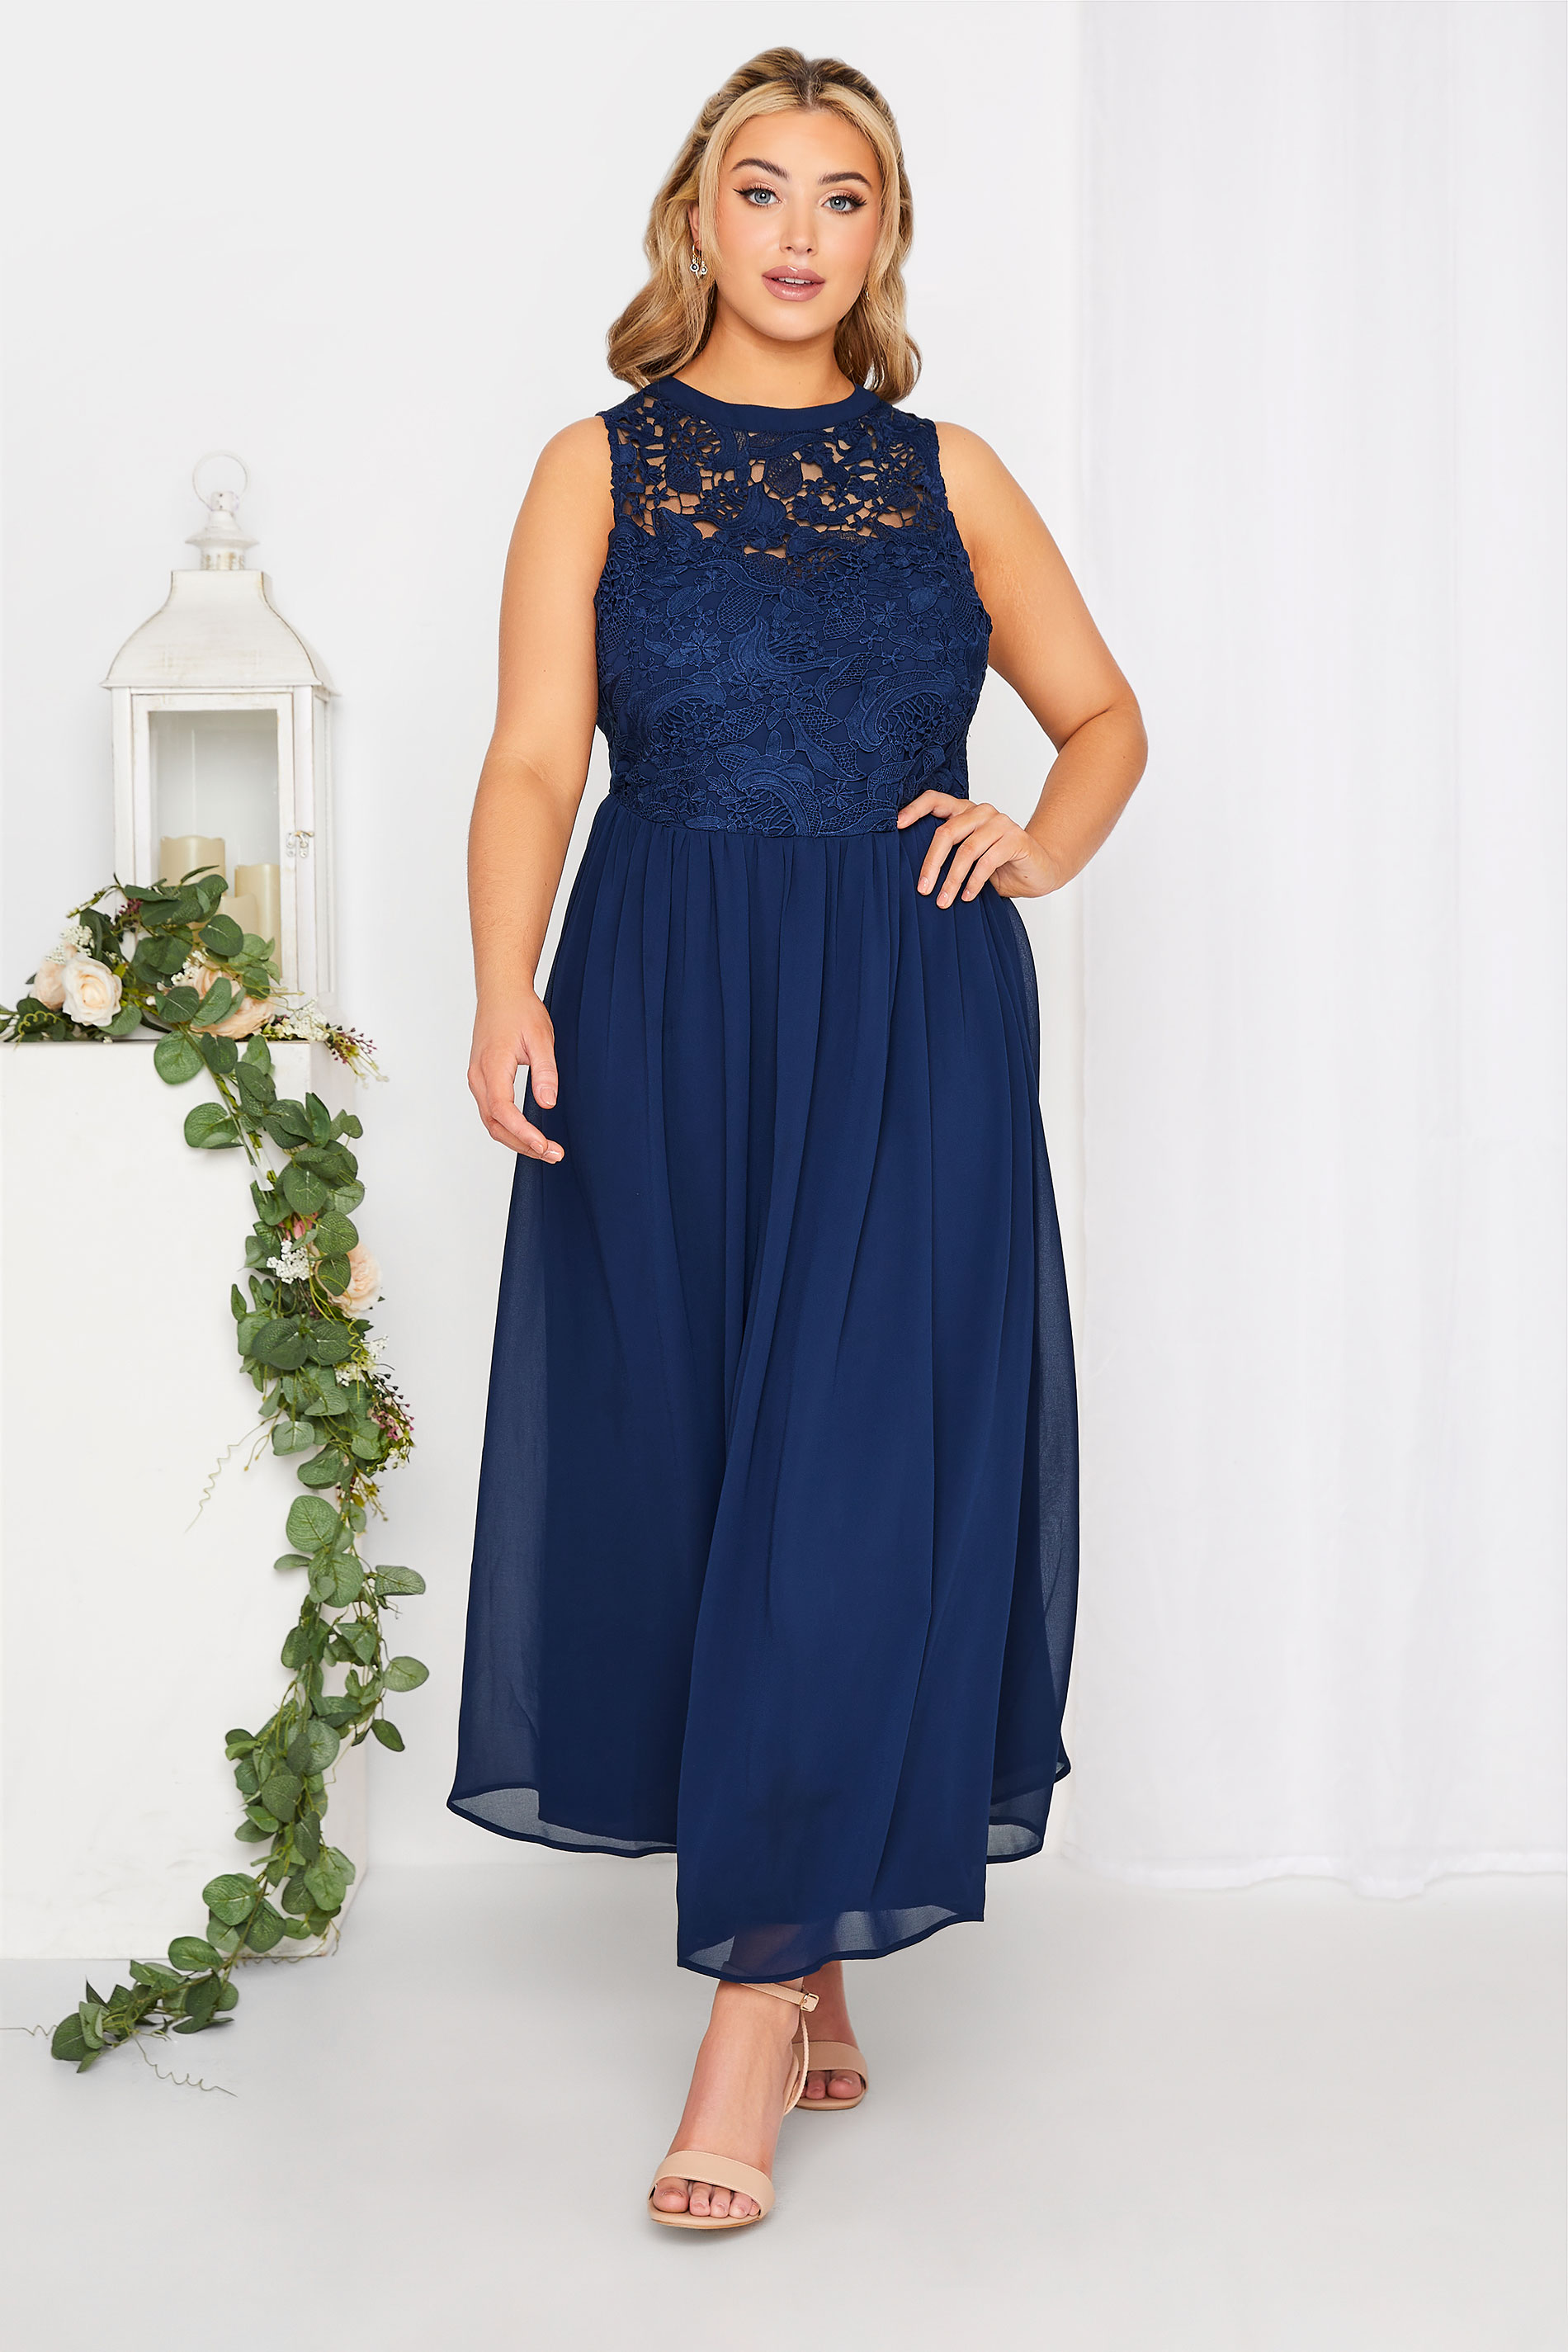 YOURS LONDON Curve Navy Blue Lace Front Chiffon Maxi Bridesmaid Dress_A.jpg